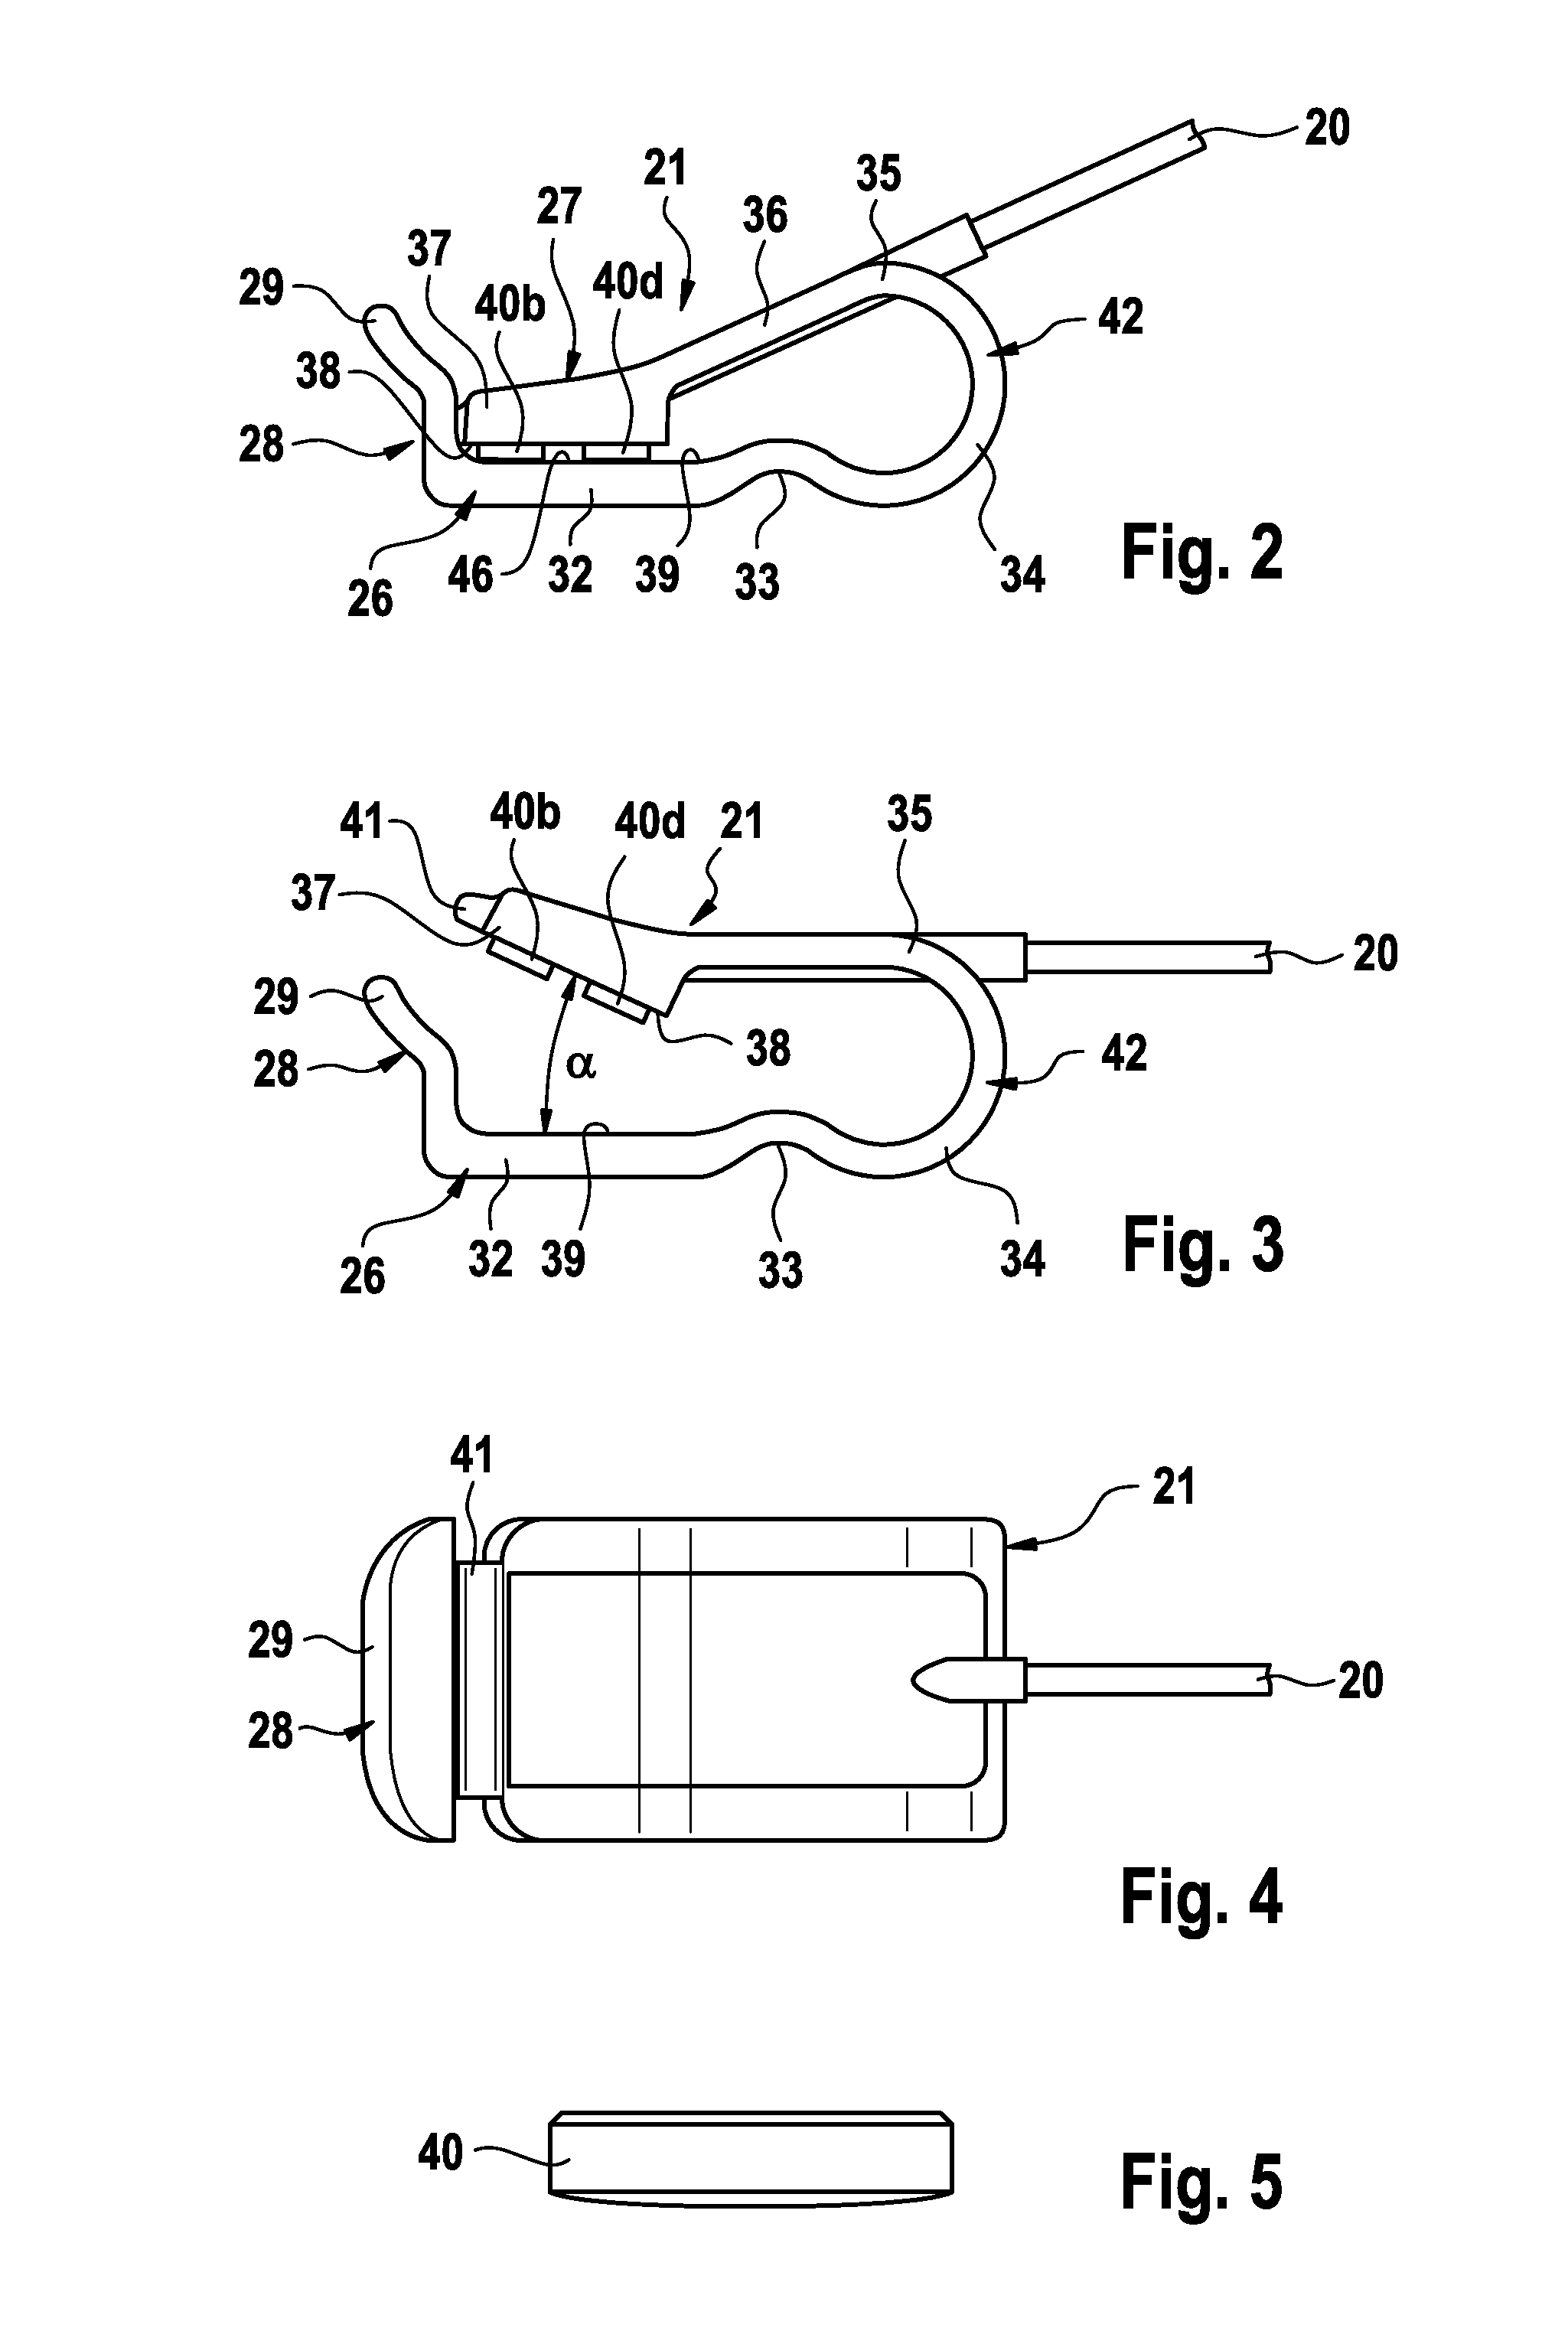 Terminal clamp for a moisture sensor for monitoring a vascular access